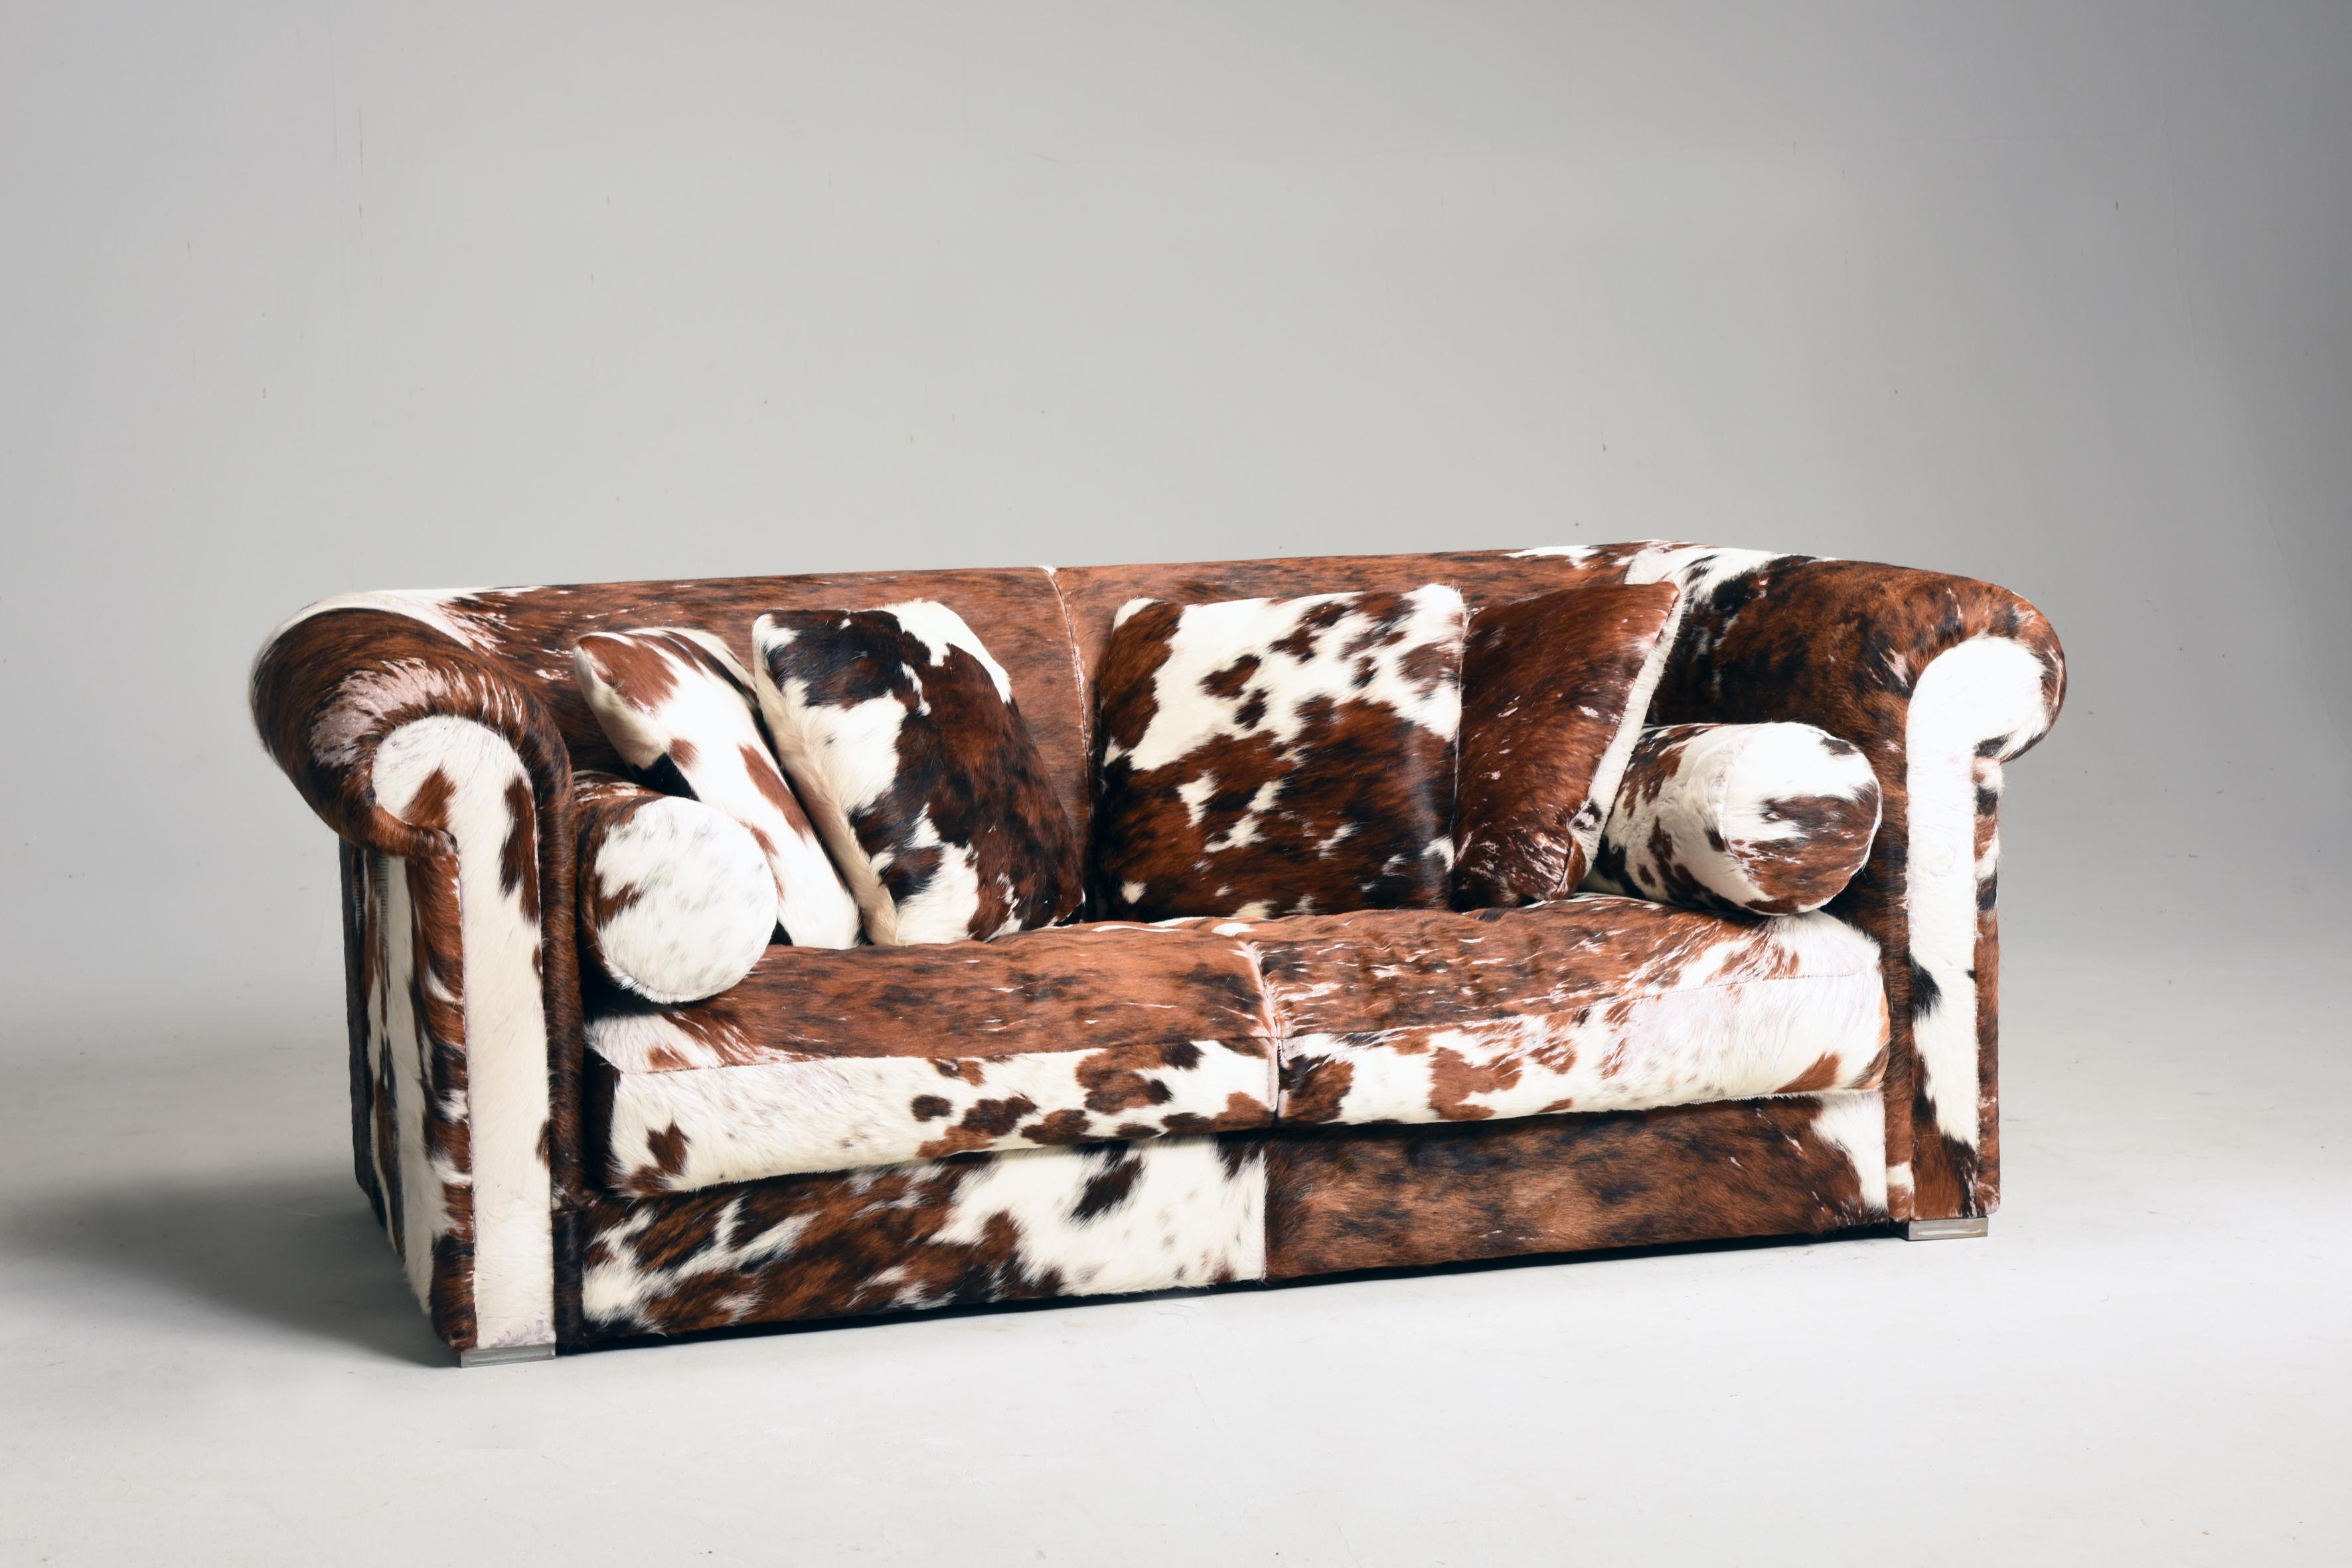 1990s Italian dappled pony skin leather sofa and pillows by Baxter. The sofa comes with a set of pillows squared and tubular shaped. They all are upholstered with pony skin leather brown and white color. This kind of sofa is ideal in a very modern